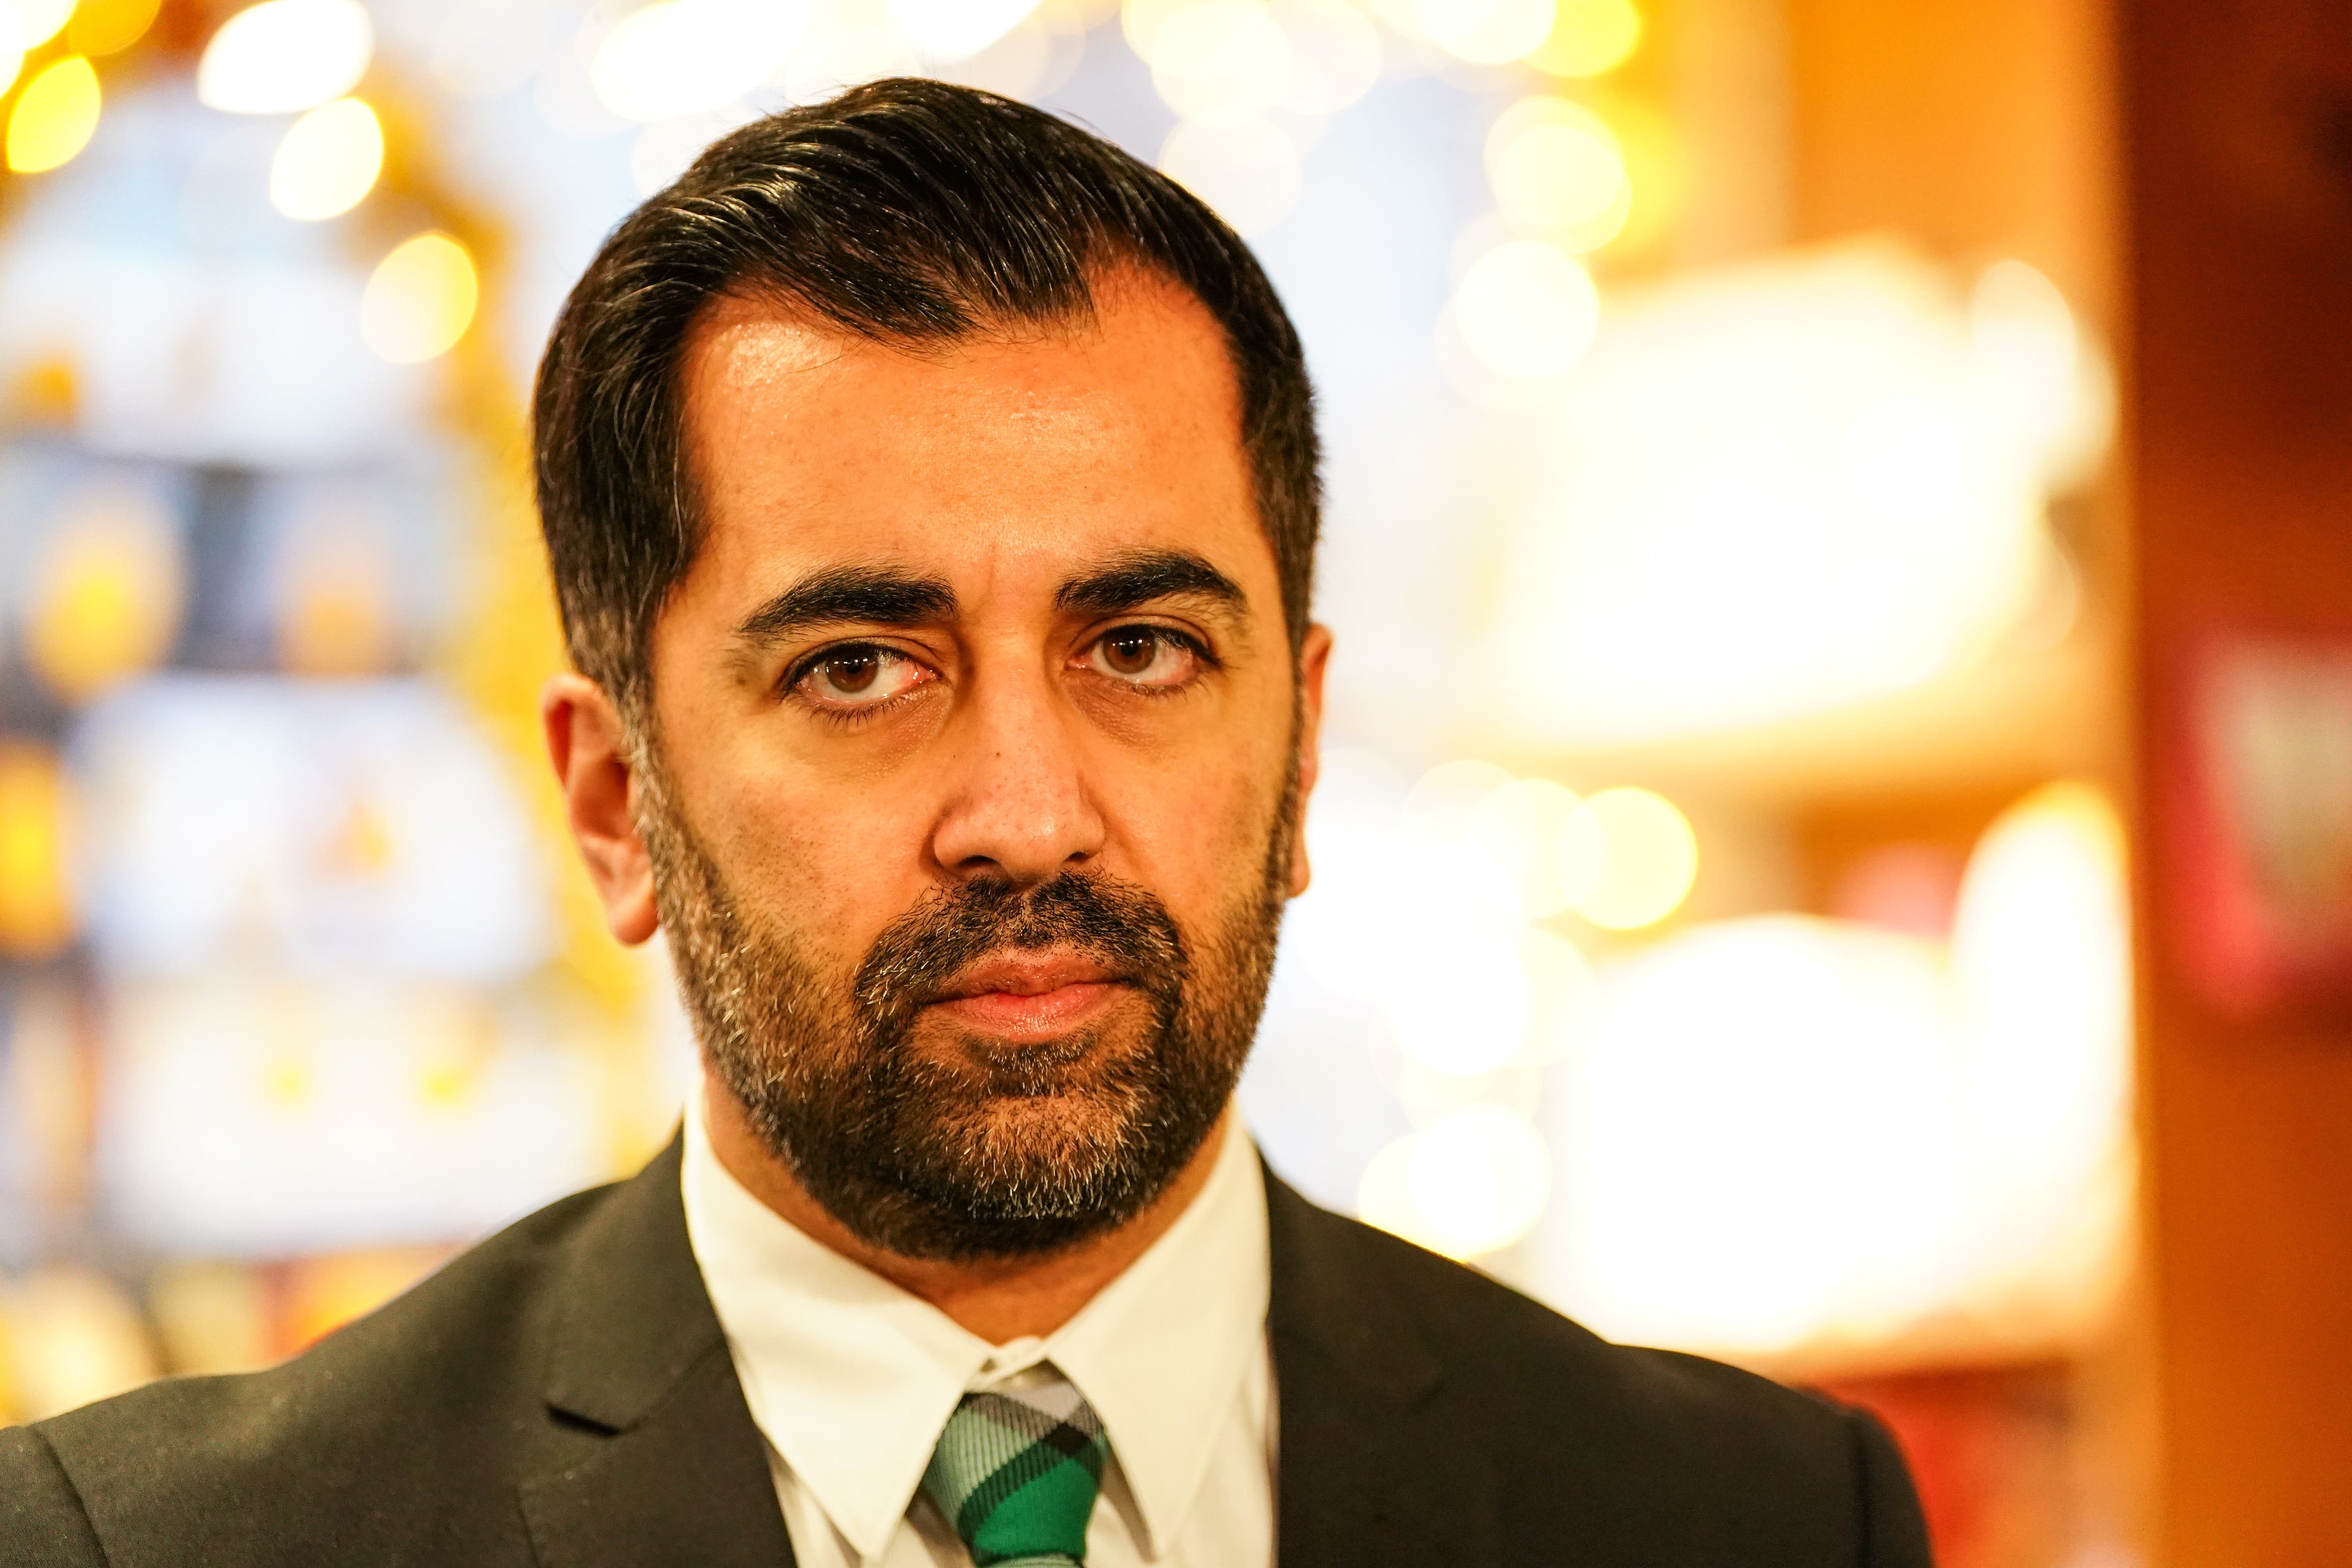 Humza Yousaf said it ws ‘disappointing’ the Cop28 summit failed to produce ‘a stronger resolution committing to the phase-out of all unabated fossil fuels’ (Pete Summers/PA)